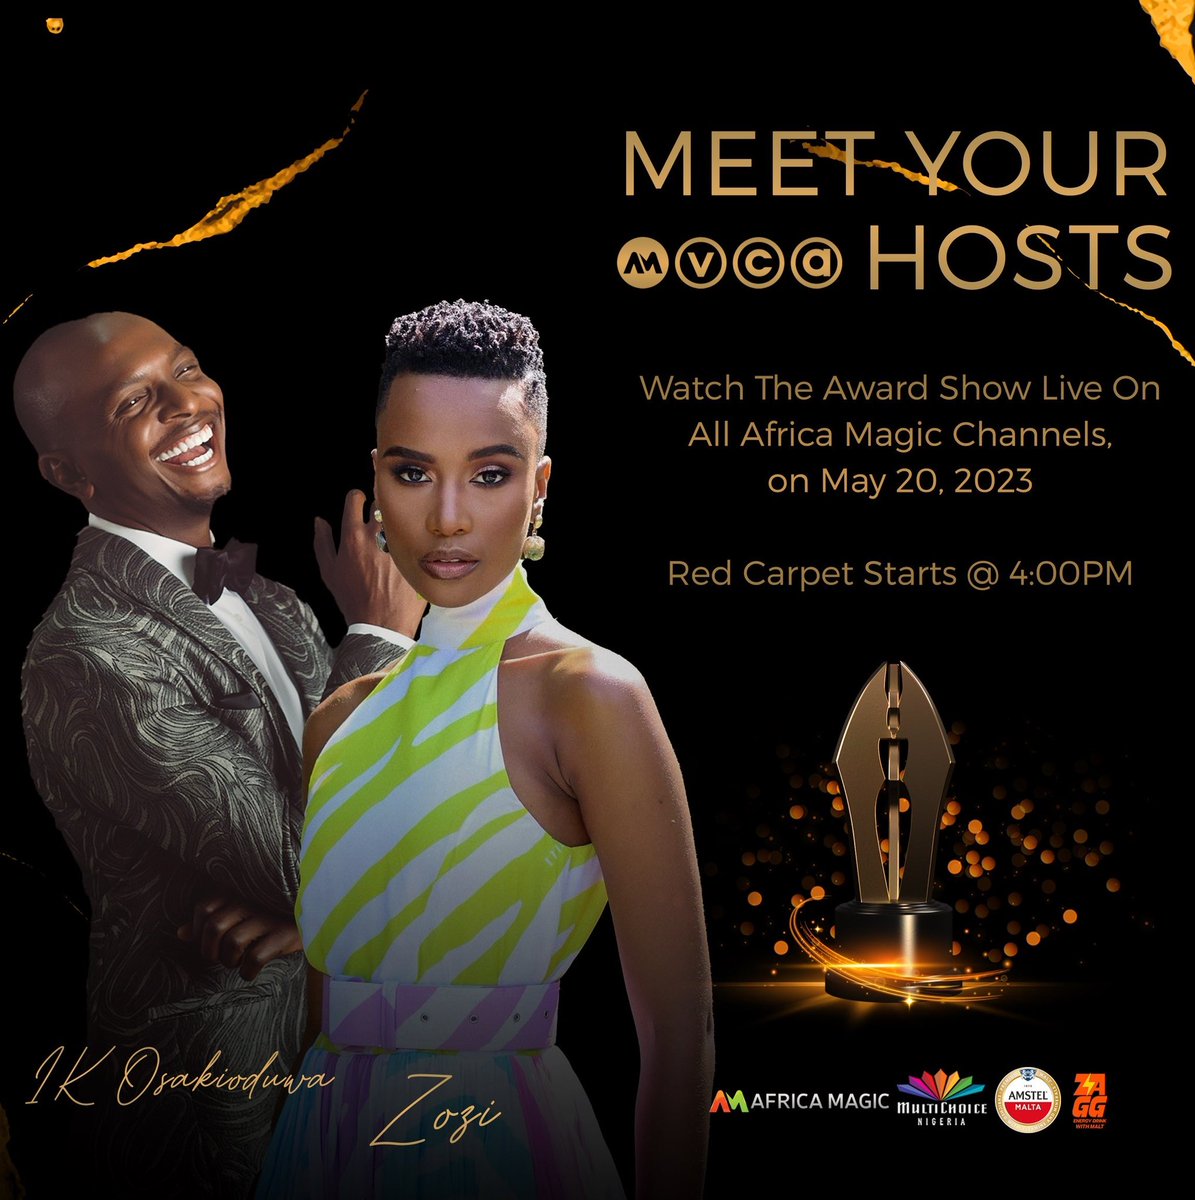 South Africa Model and Miss Universe 2019, Zozibini Tunzi, has been announced as the co-host of the 9th edition of the Africa Magic Viewer’s Choice Awards. https://t.co/GJCqzGo8sH